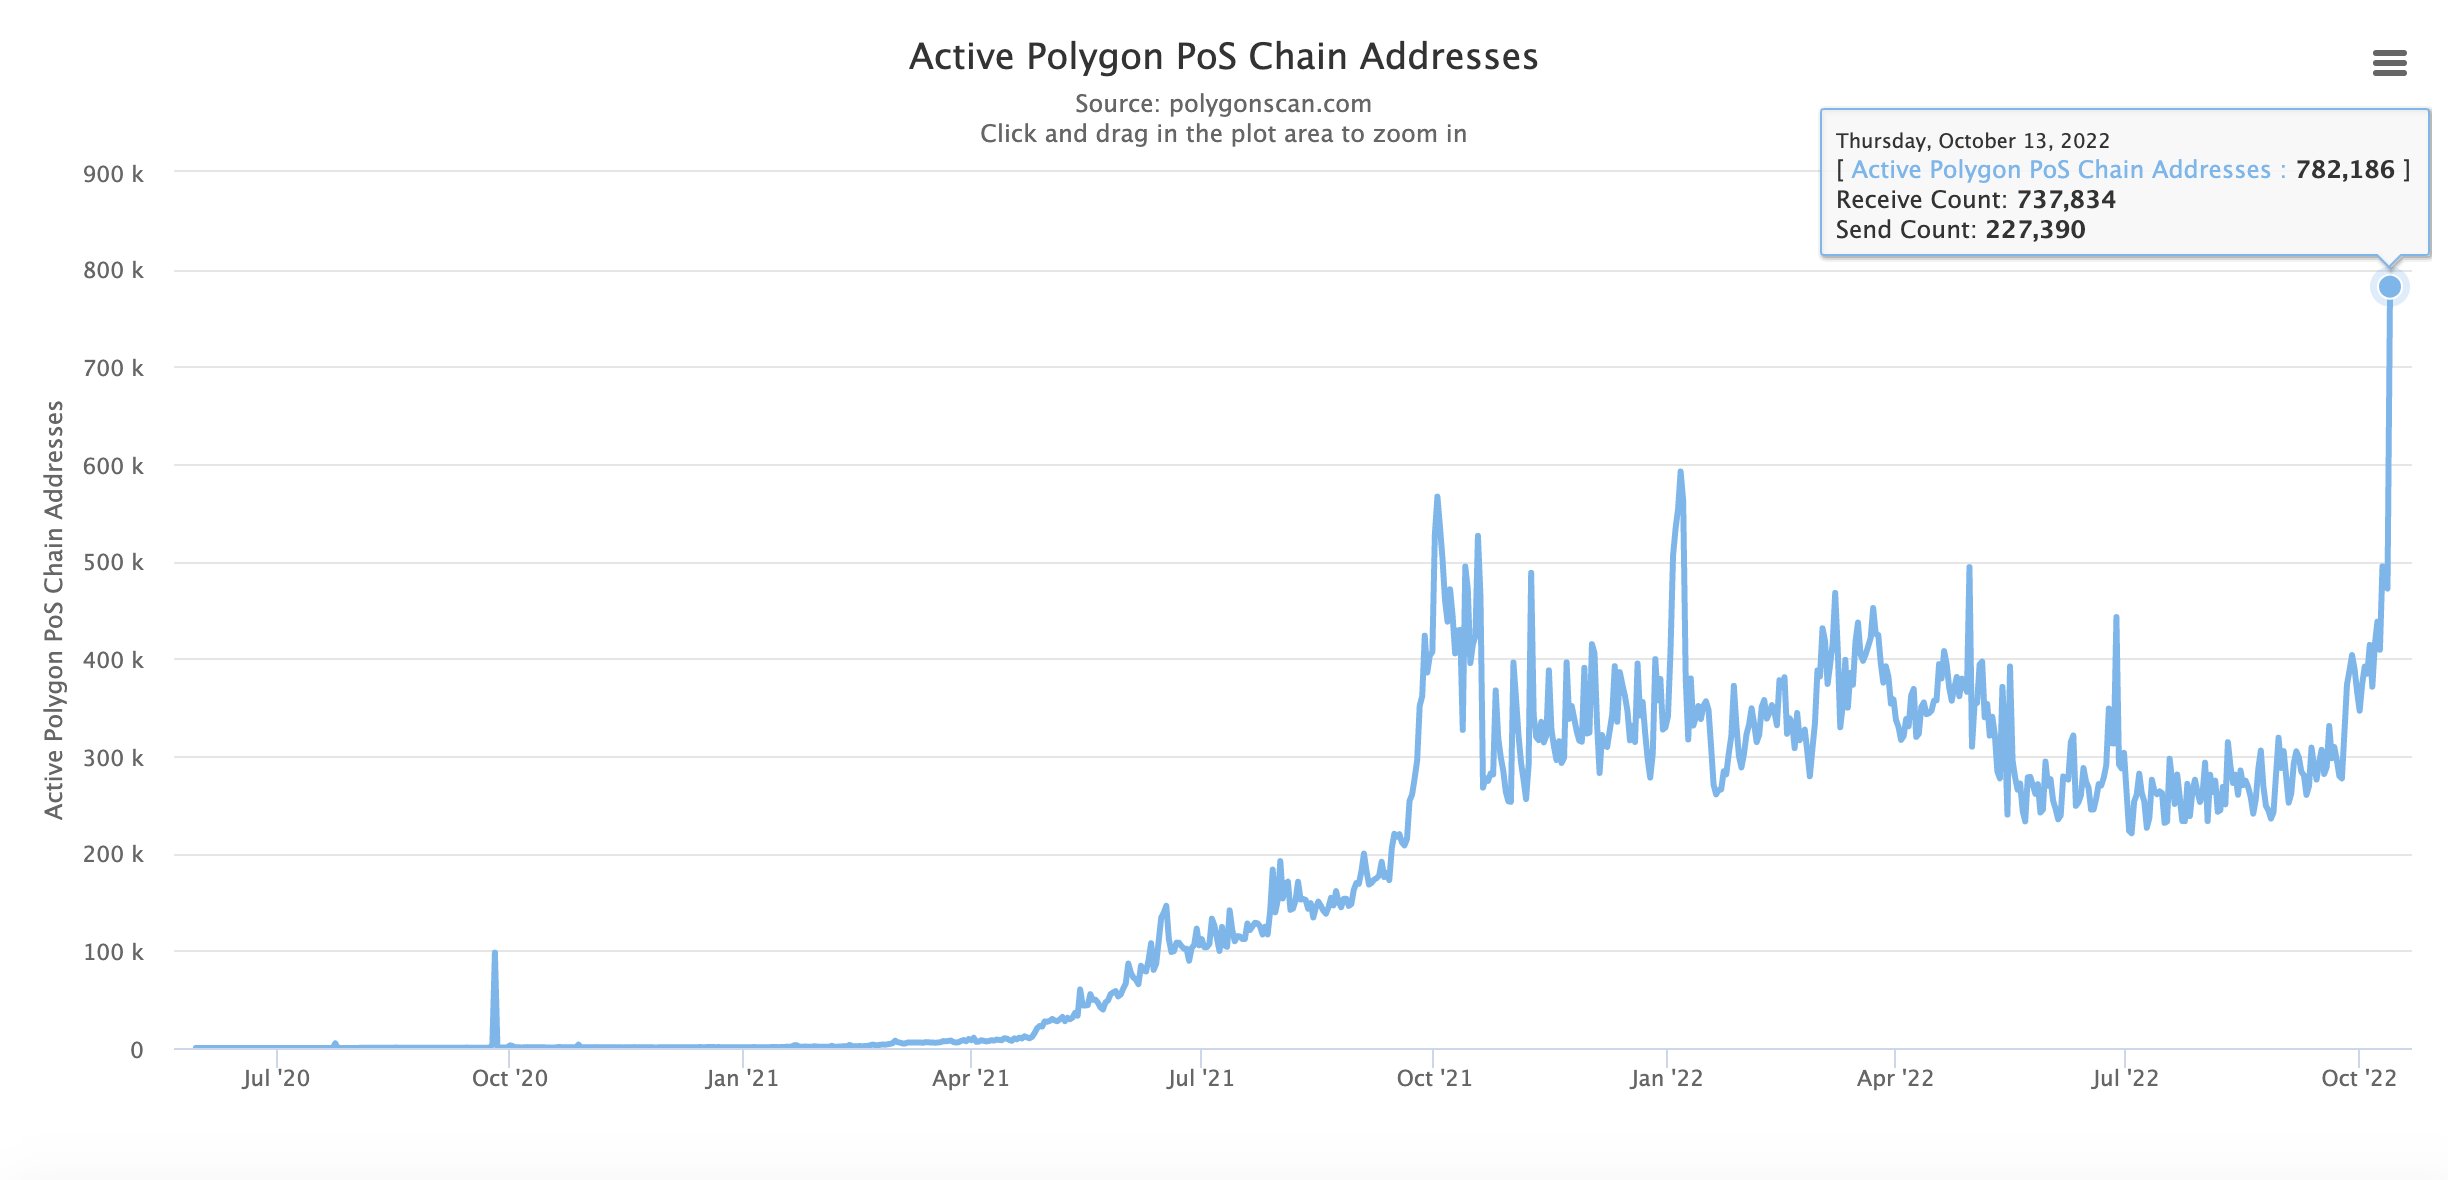 Polygon Daily Active Addresses Hit New All-Time High